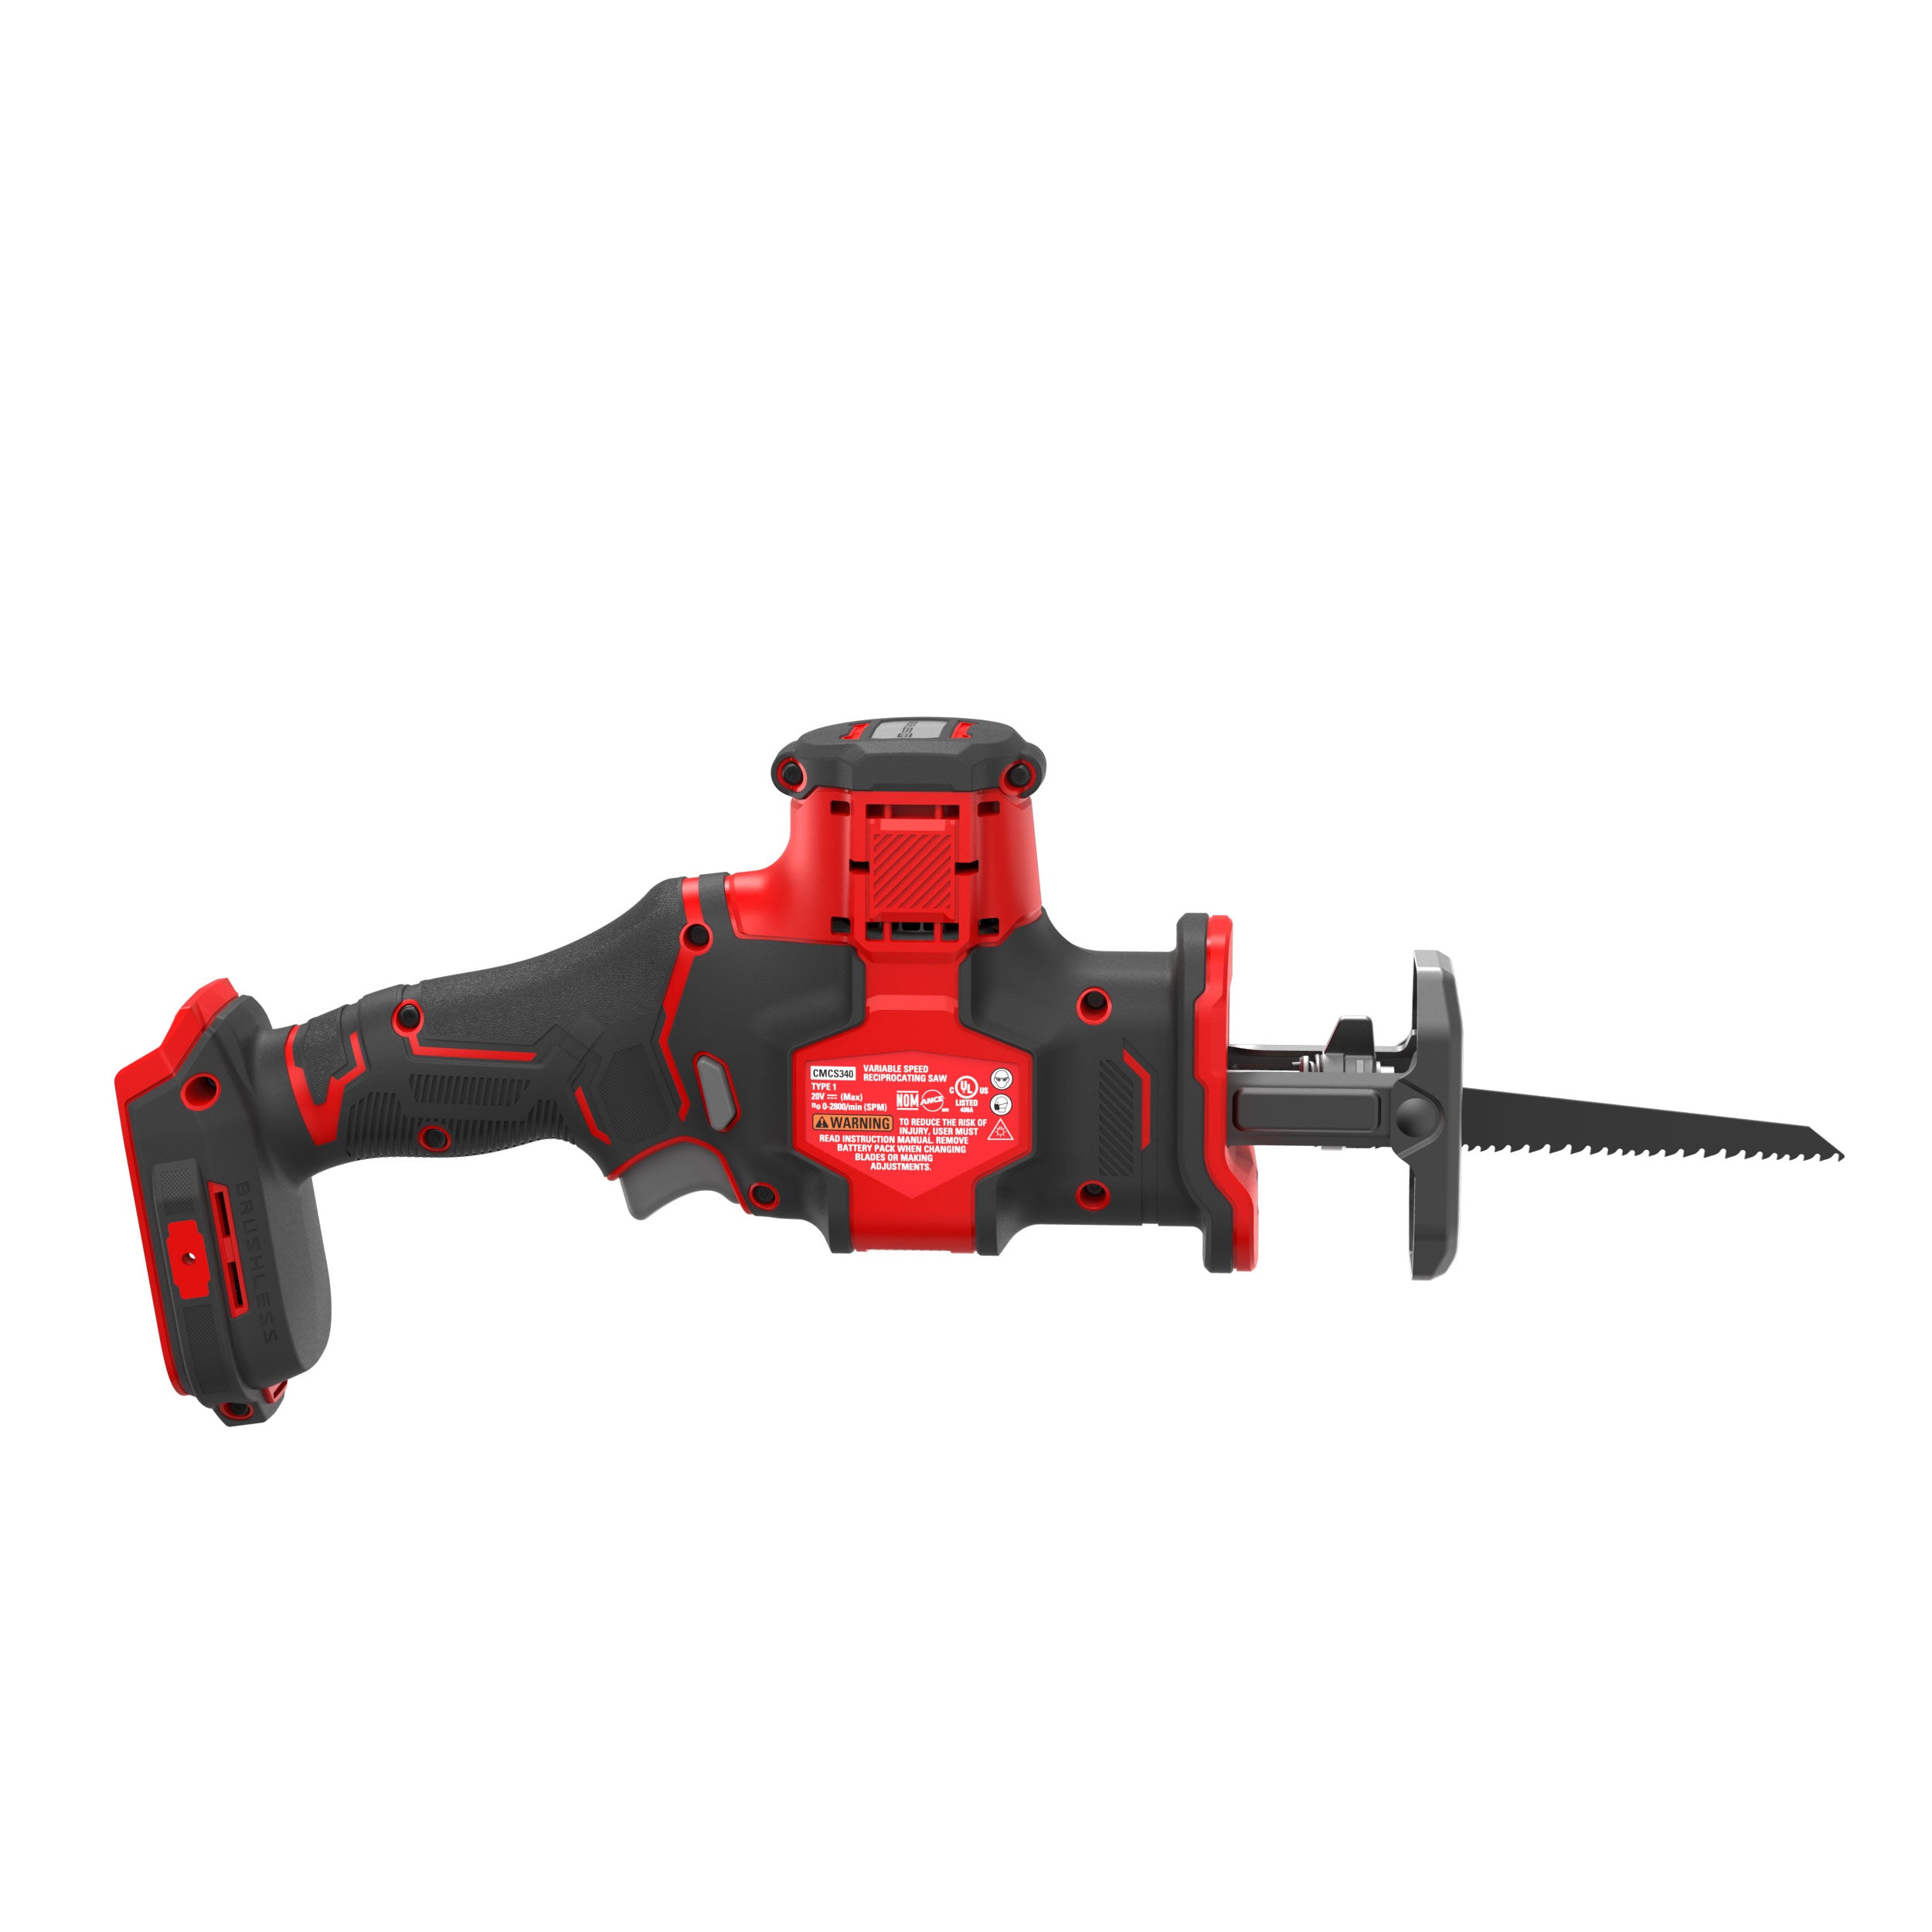 V20* BRUSHLESS RP™ Compact Reciprocating Saw (Tool Only